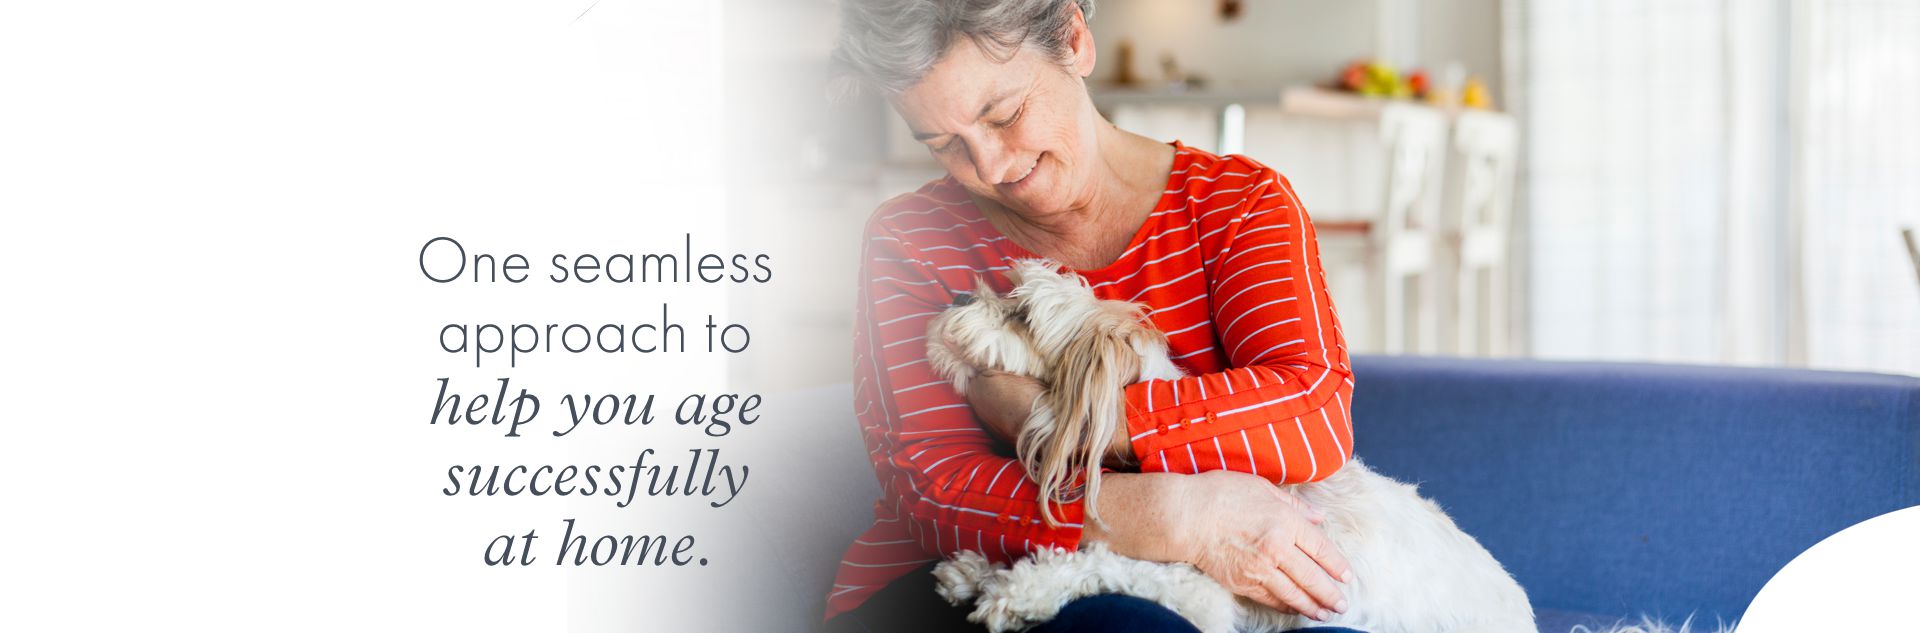 One seamless approach to help you age successfully  at home.